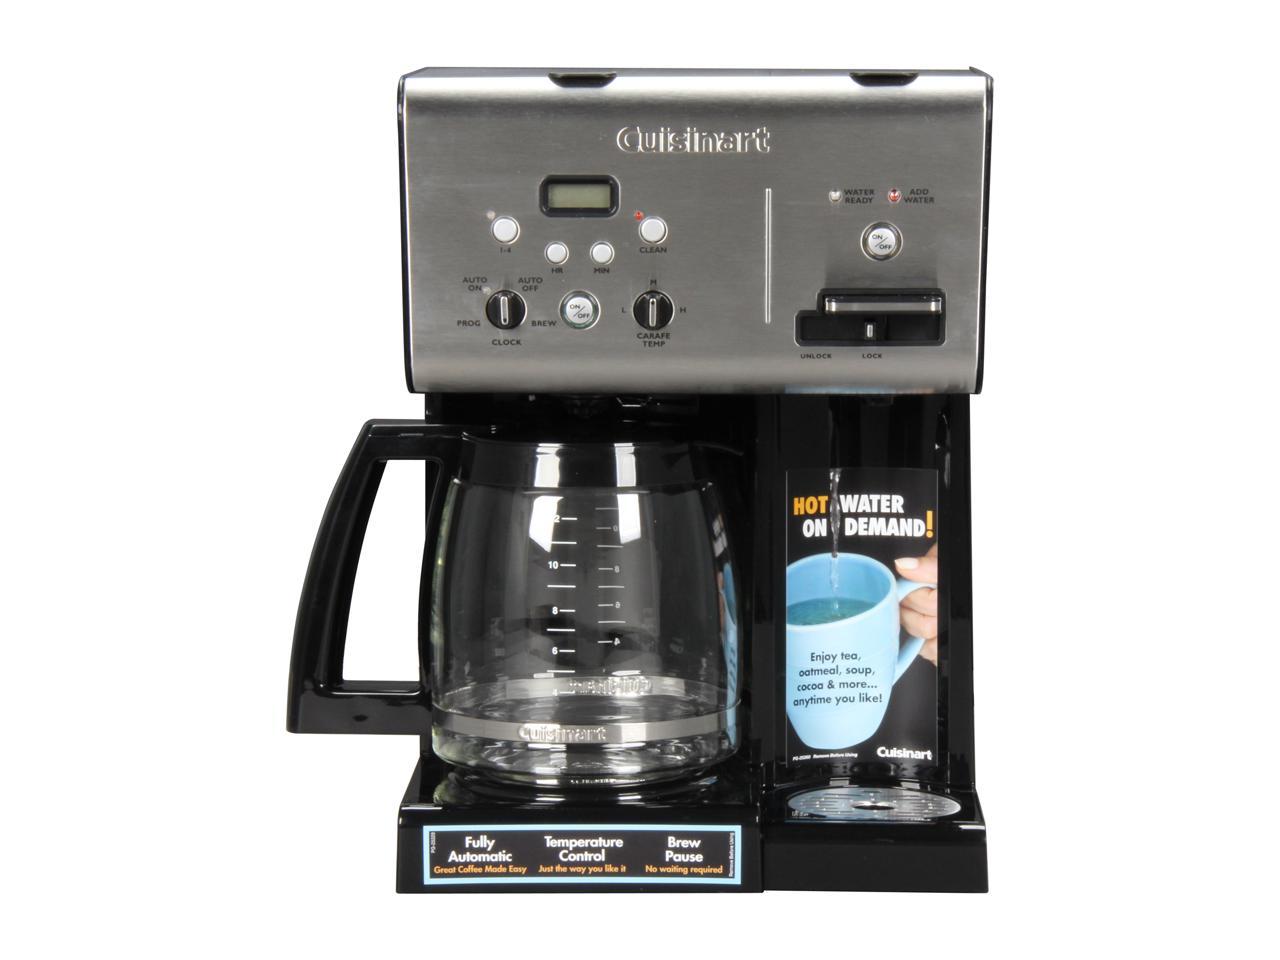 Cuisinart CHW-12 12-Cup Programmable Coffeemaker Plus Hot Water System Coffee Maker Black/Stainless